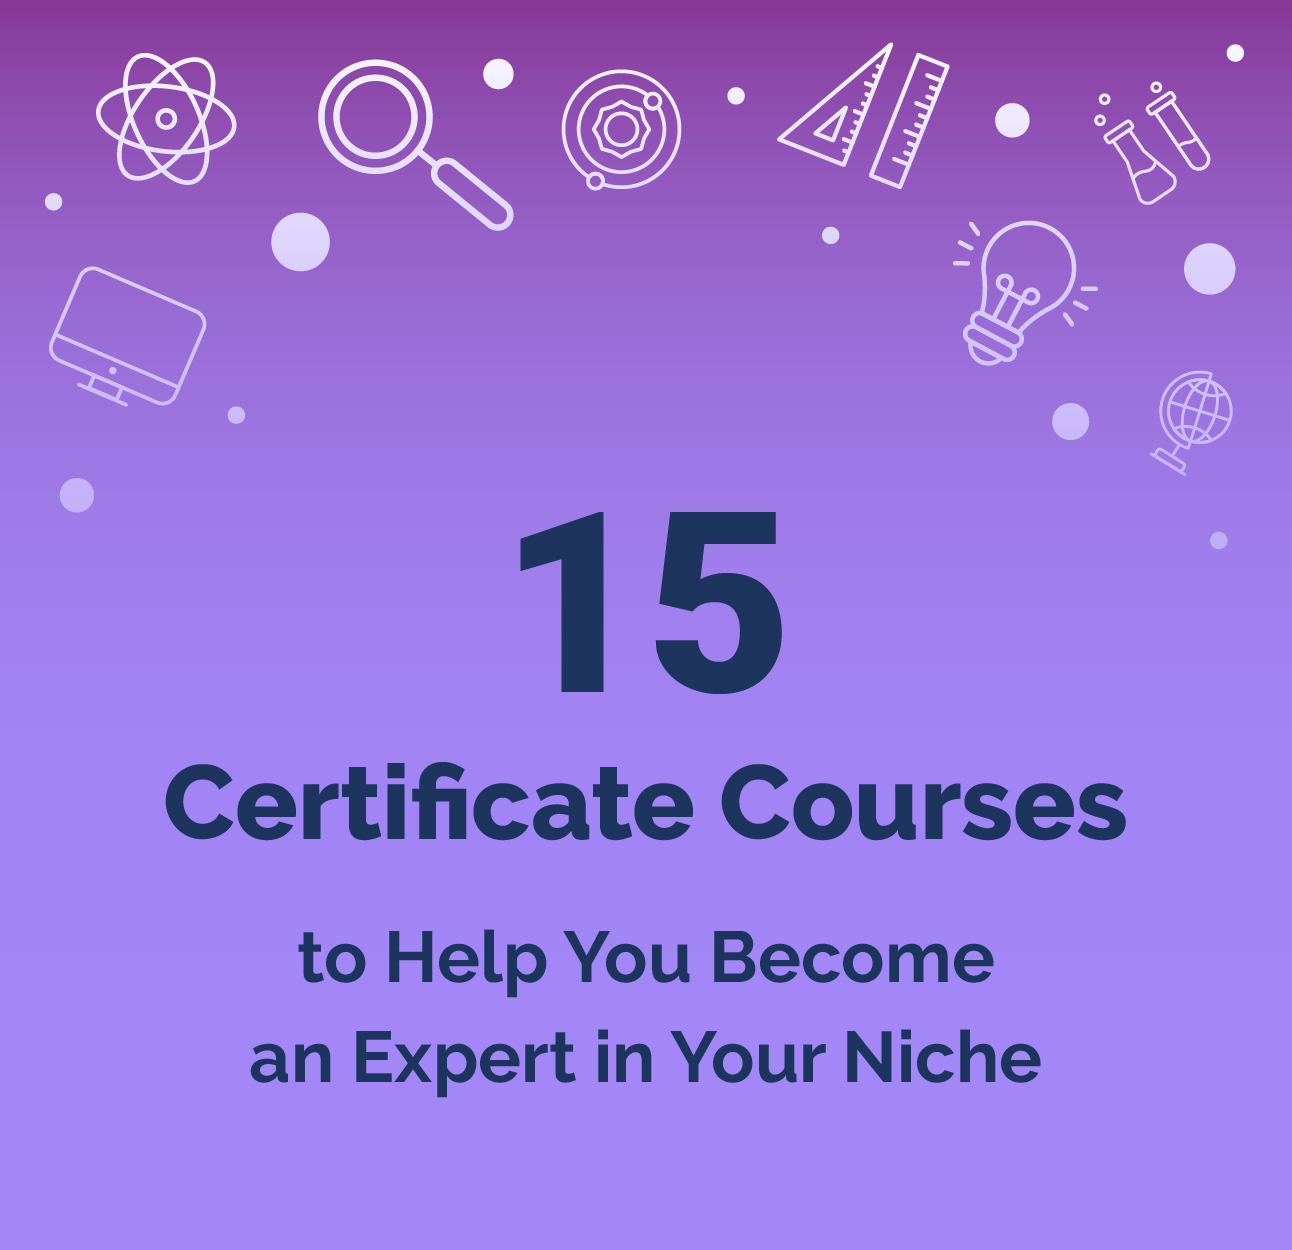 15 Certificate Courses to Help You Become an Expert in Your Niche